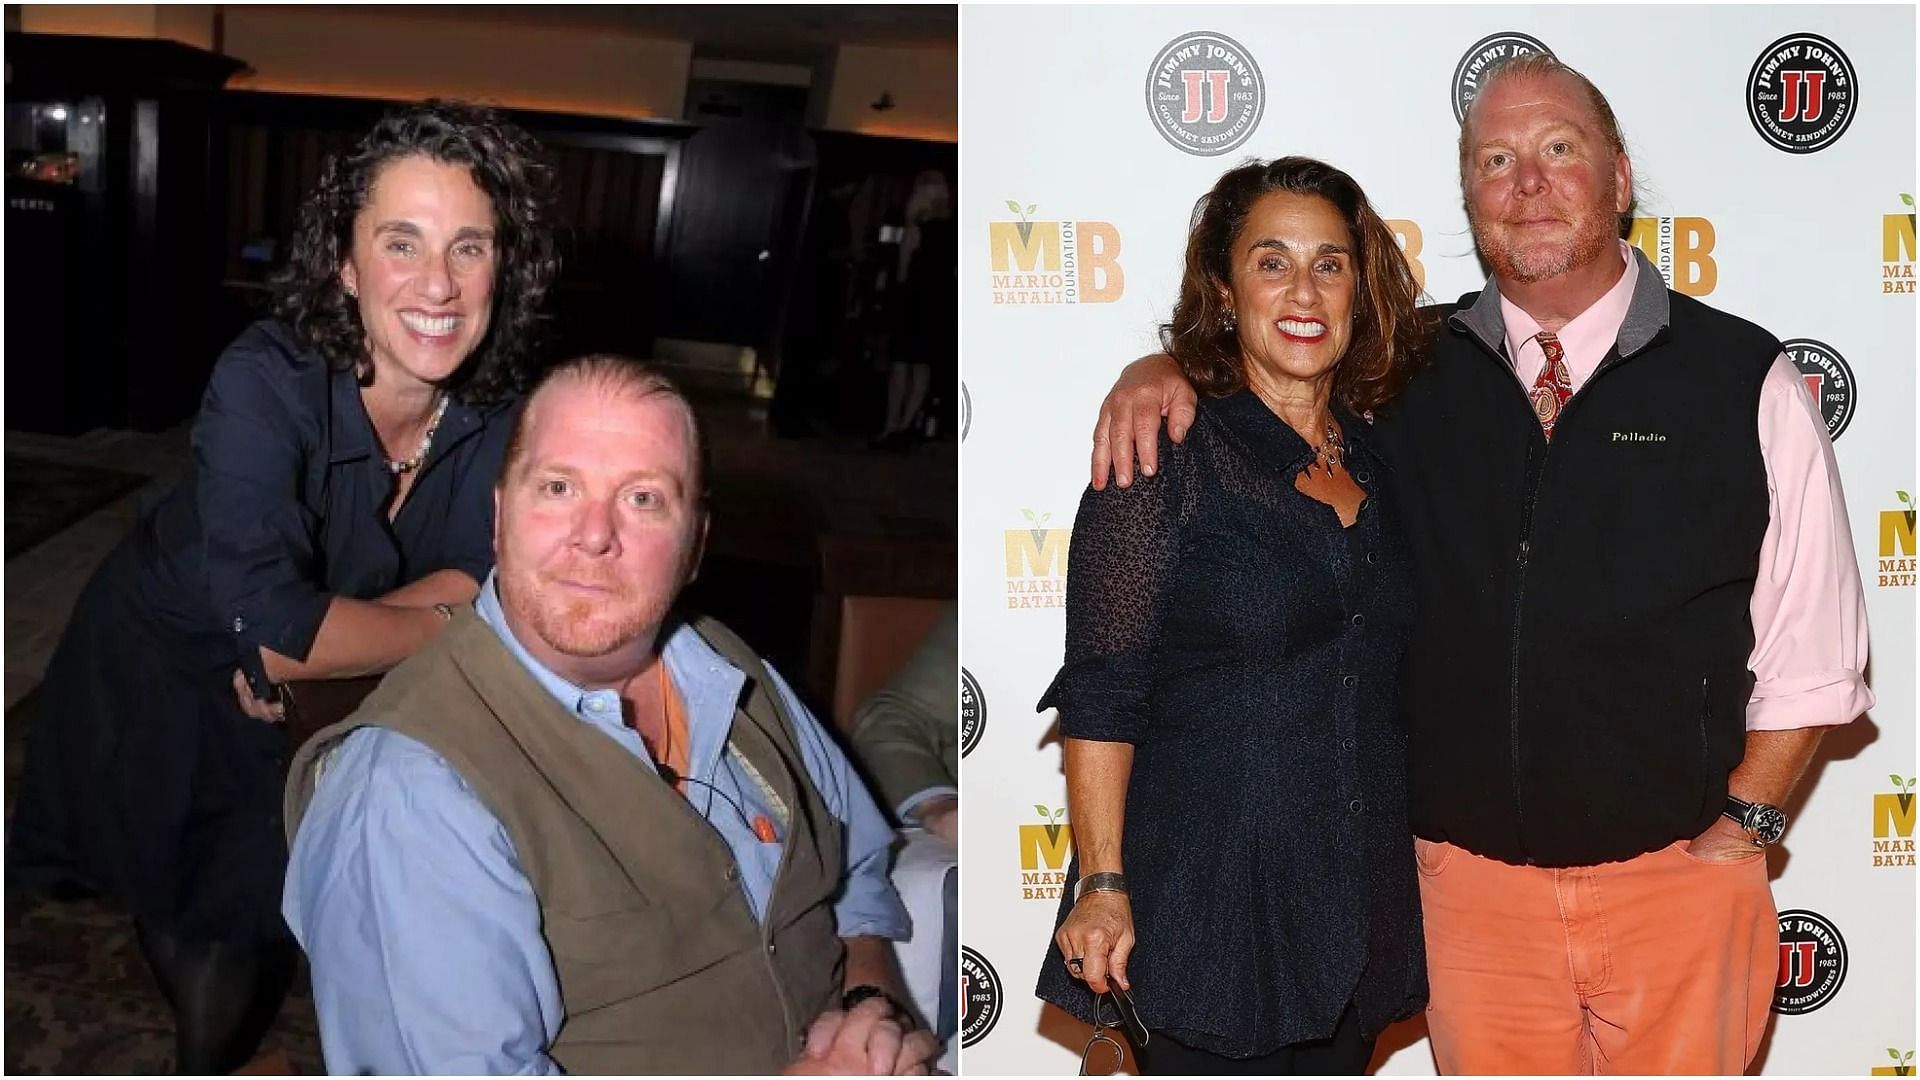 Susi Cahn and Mario Batali (Image via Michael Loccisano/Getty Images and Astrid Stawiarz/Getty Images)